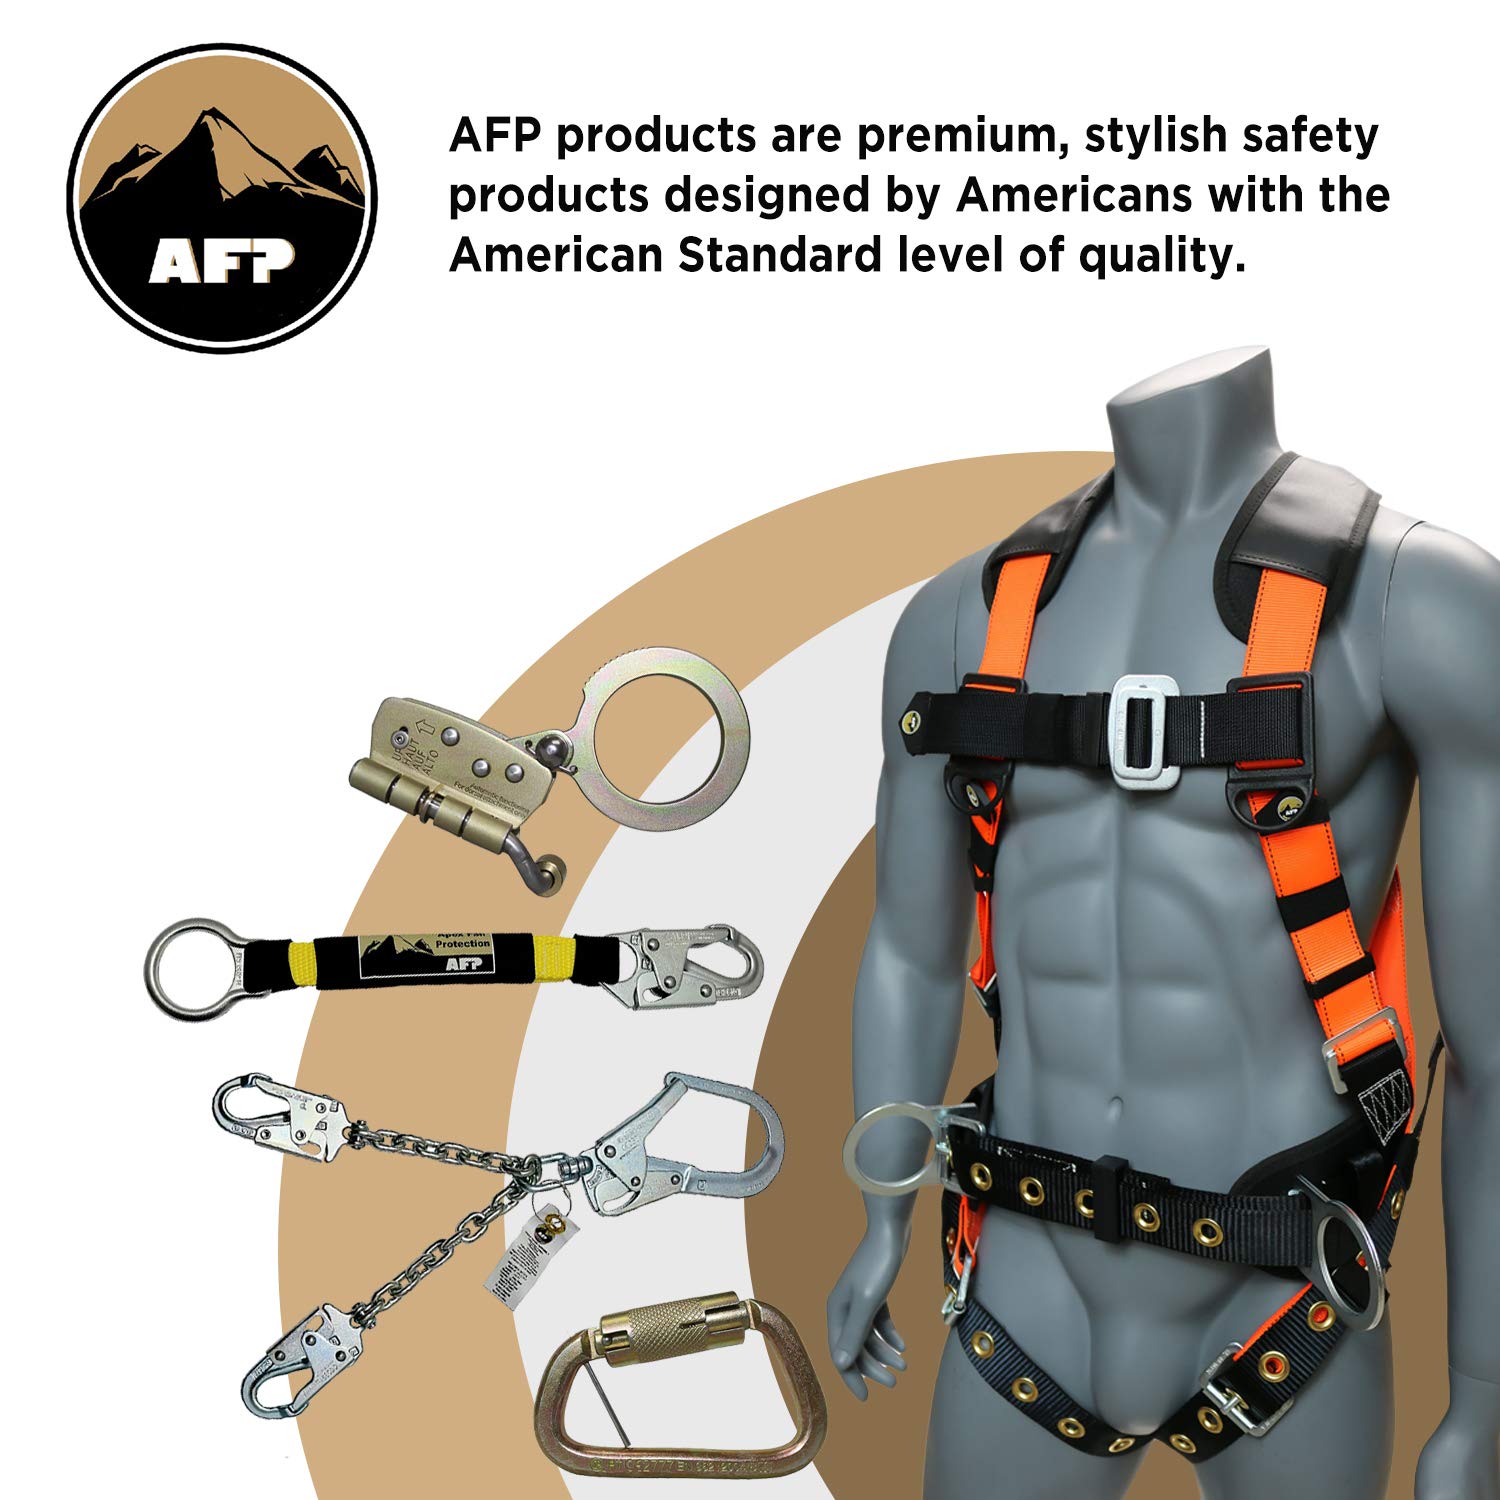 AFP Heavy-Duty Tongue Buckle Body Belt, PPE for Safety Harness, Work Positioning Restraint, Construction, Climbing, Fall-Protection (OSHA/ANSI Compliant), 1.75'' Wide, Black (Medium)